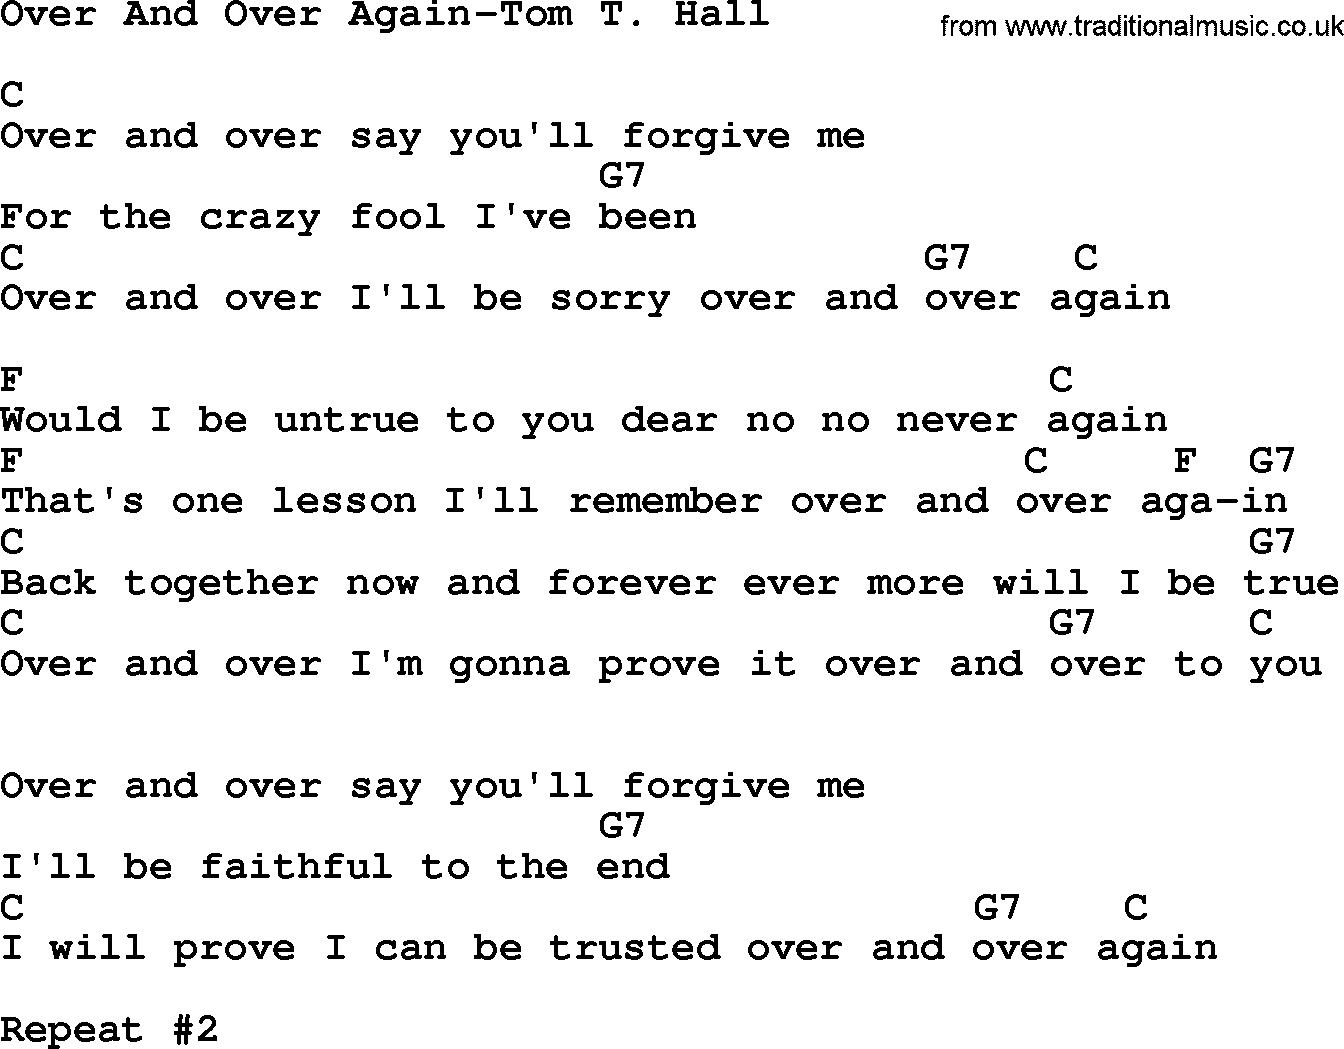 Country music song: Over And Over Again-Tom T Hall lyrics and chords